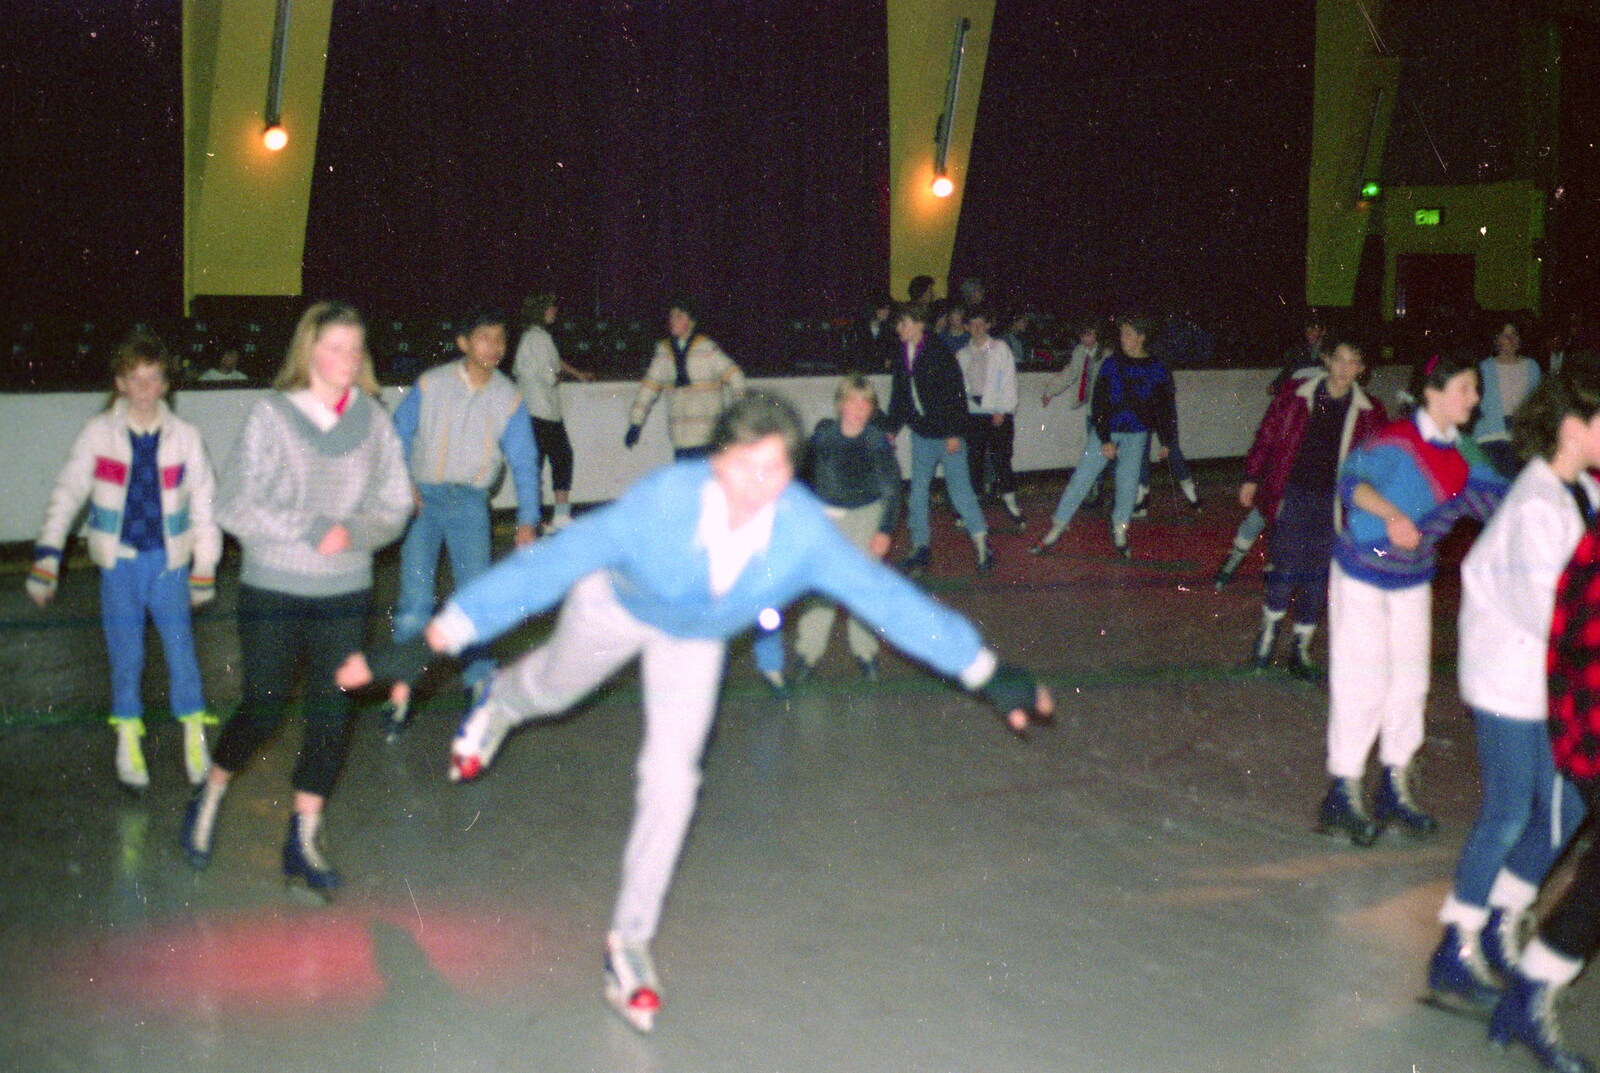 Sean skates on one leg from Uni: The Fly Christmas Party and BABS Panto, Plymouth Polytechnic, Devon - December 11th 1985